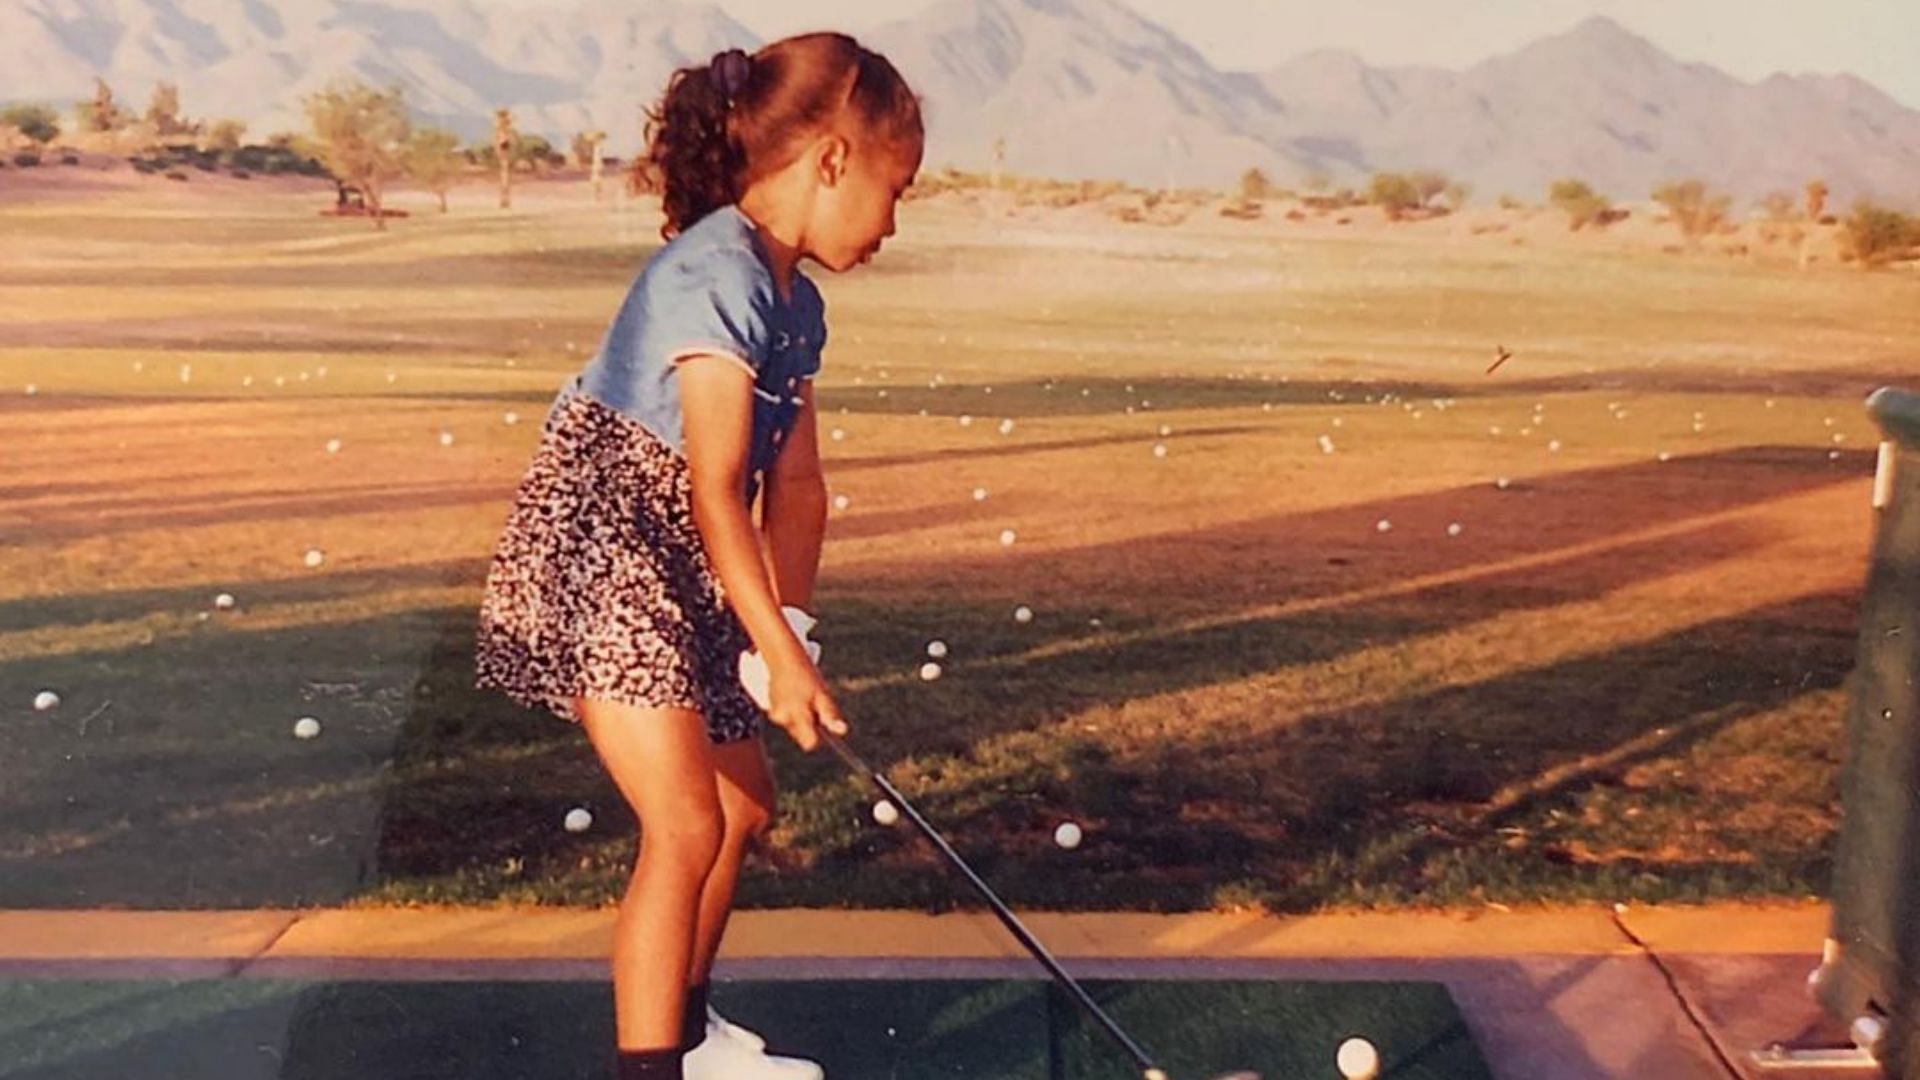 Cheyenne playing golf at the age of 6.